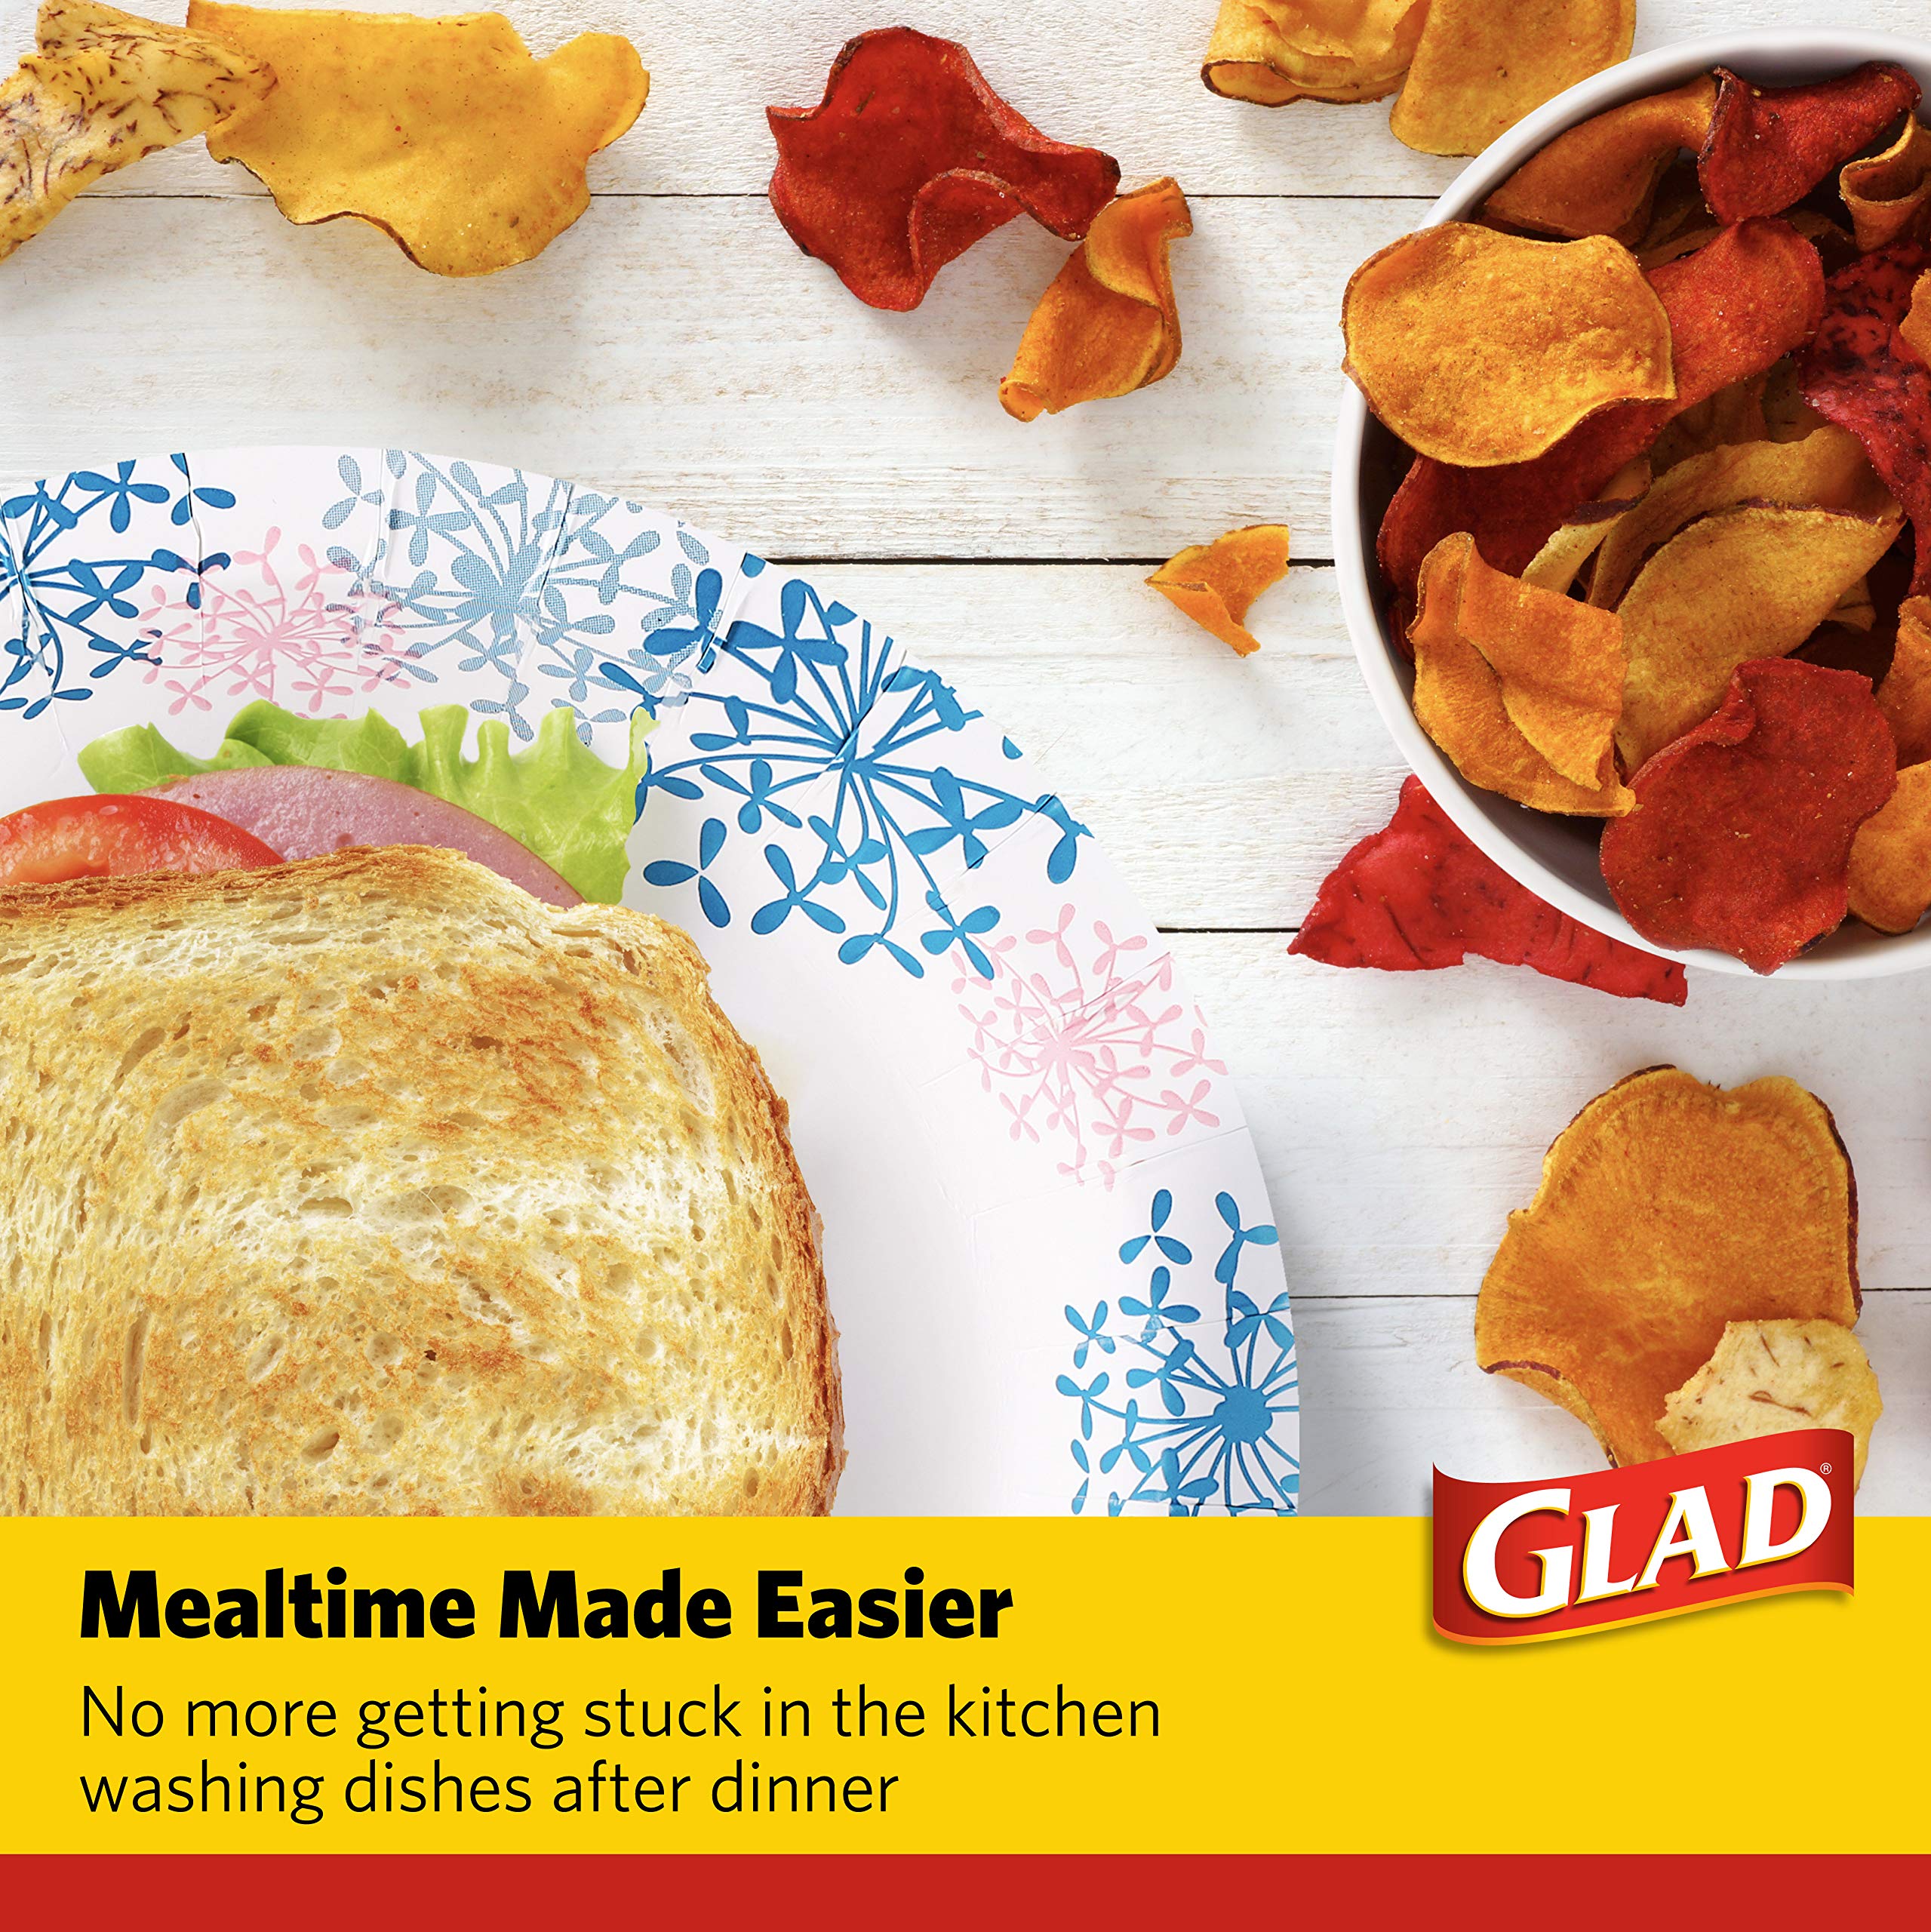 Glad Round Disposable Paper Plates for All Occasions | Soak/ Cut Proof, Microwaveable Heavy Duty Disposable 8.5